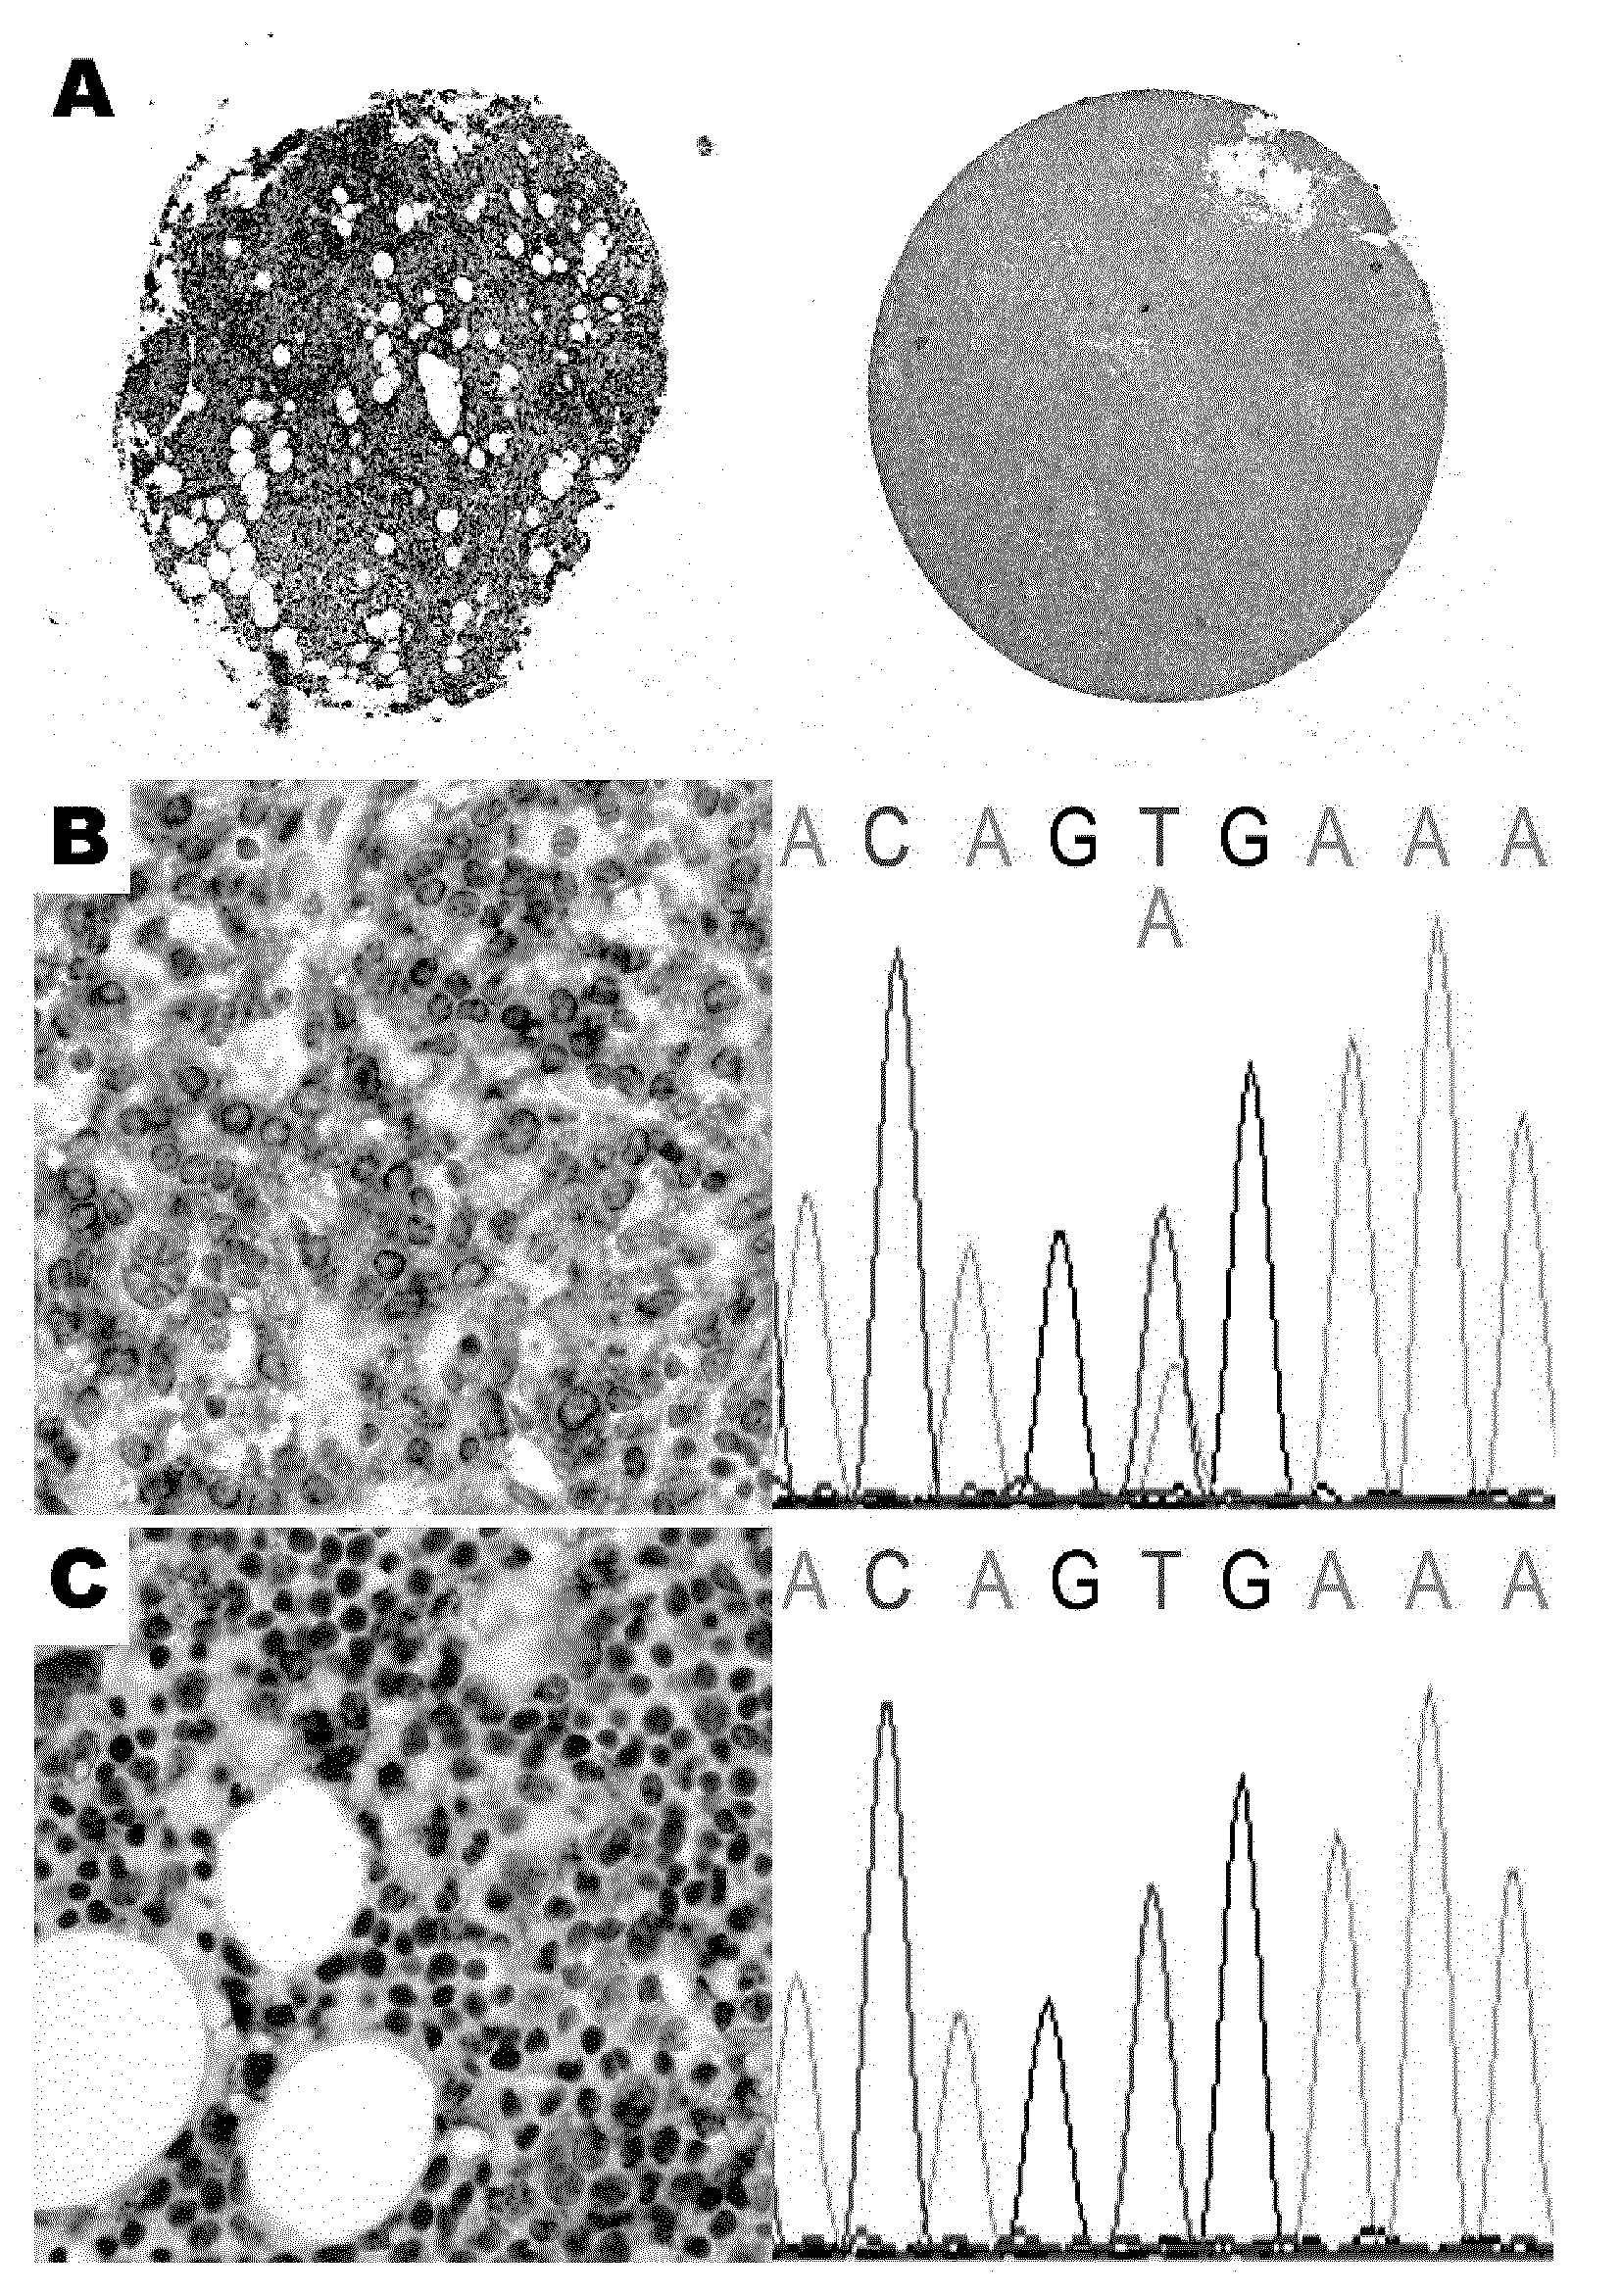 Means and methods for diagnosing cancer using an antibody which specifically binds to BRAF V600E